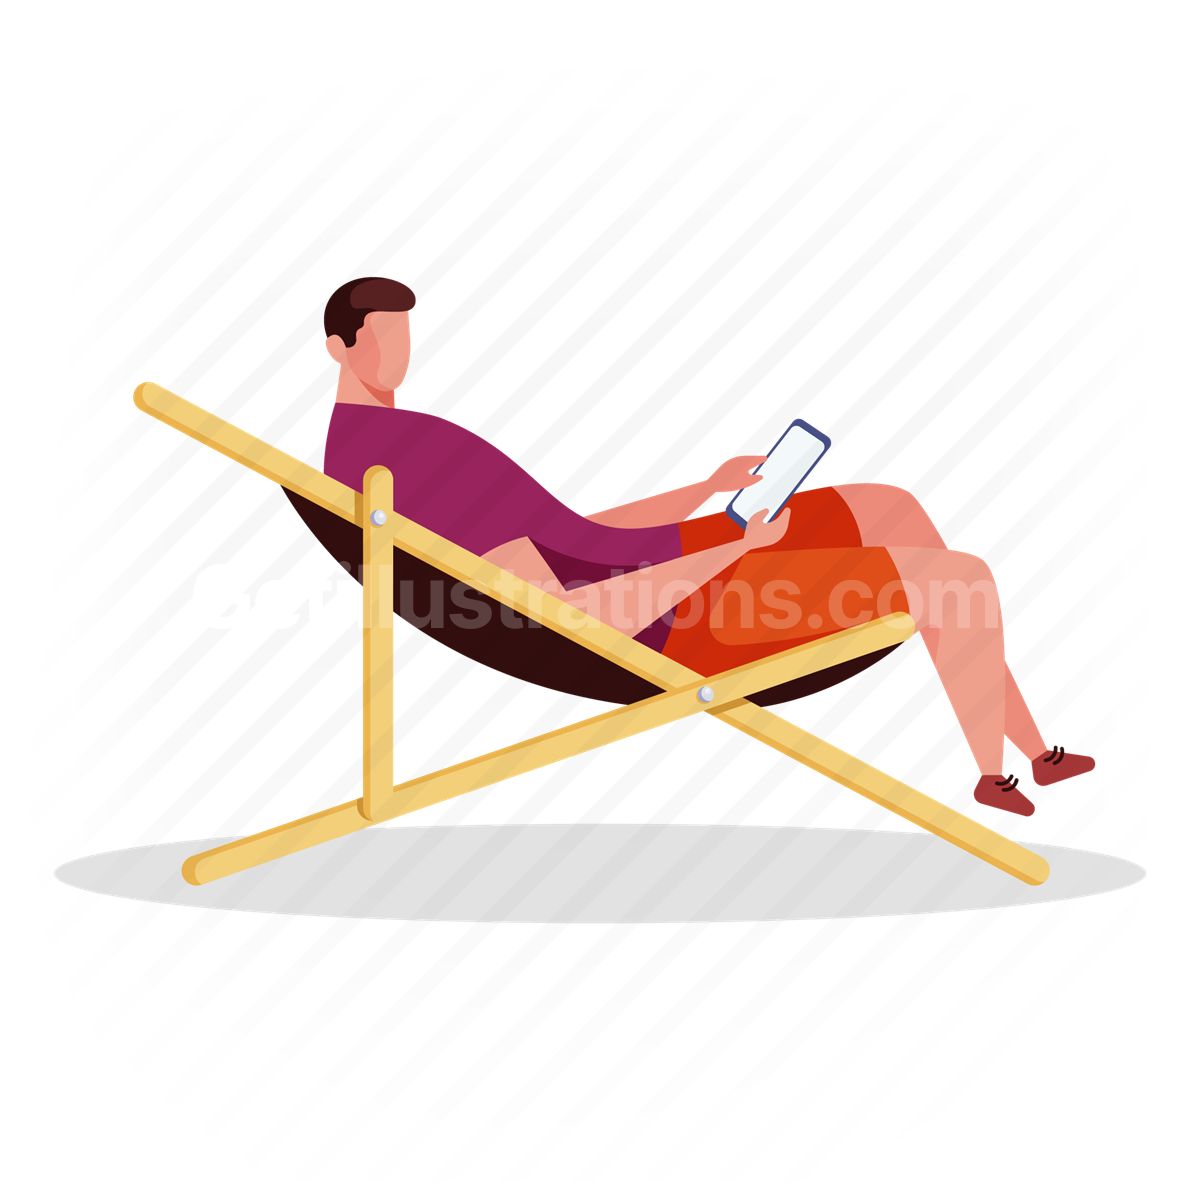 man, chaise lounge, chair, electronic, device